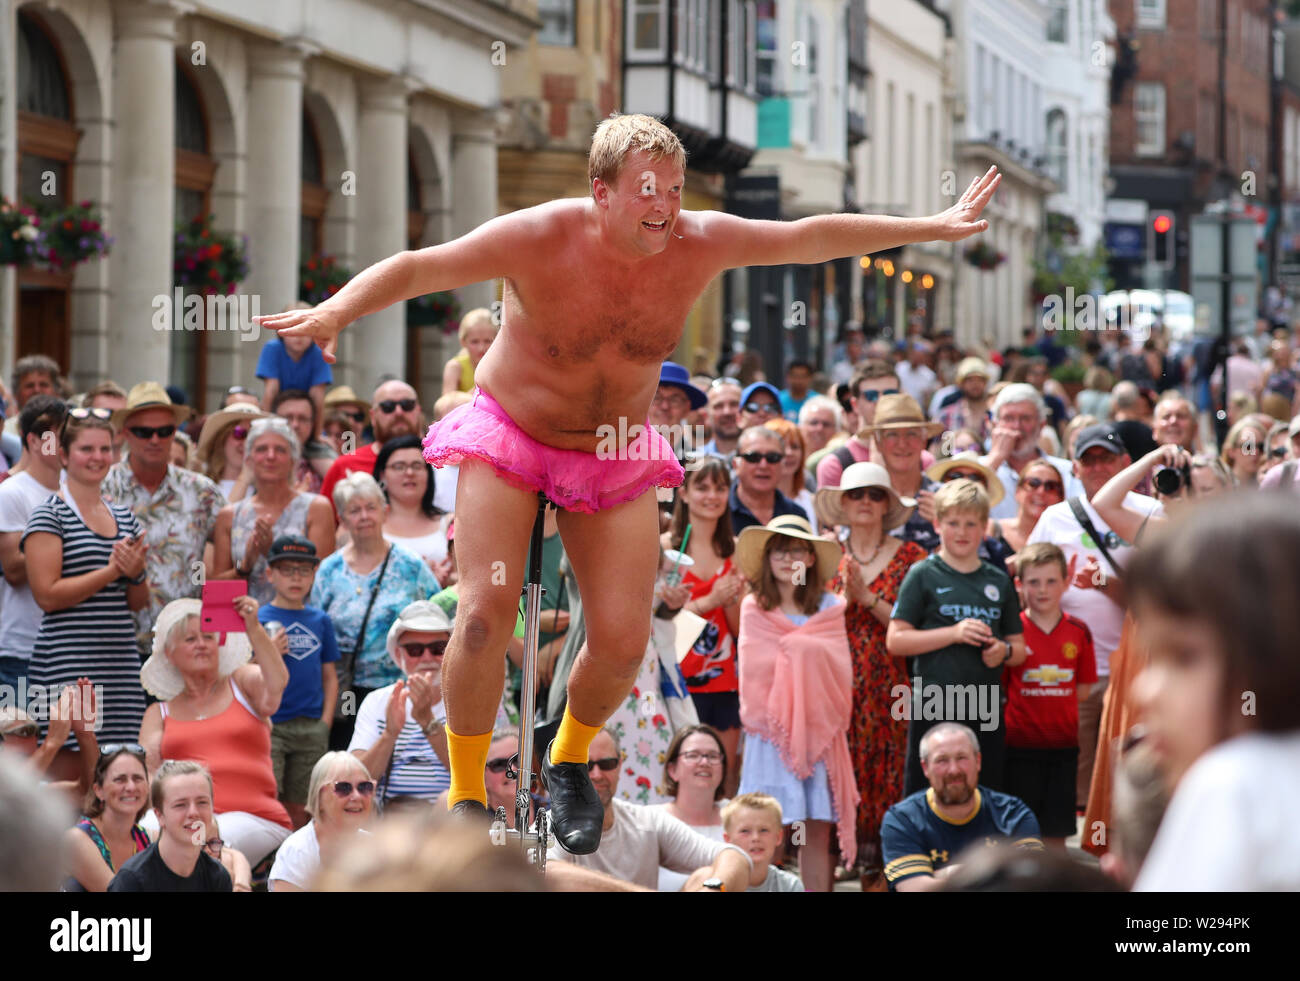 Street performers Garaghty and Thom entertain the crowds at Winchester Hat Fair Stock Photo